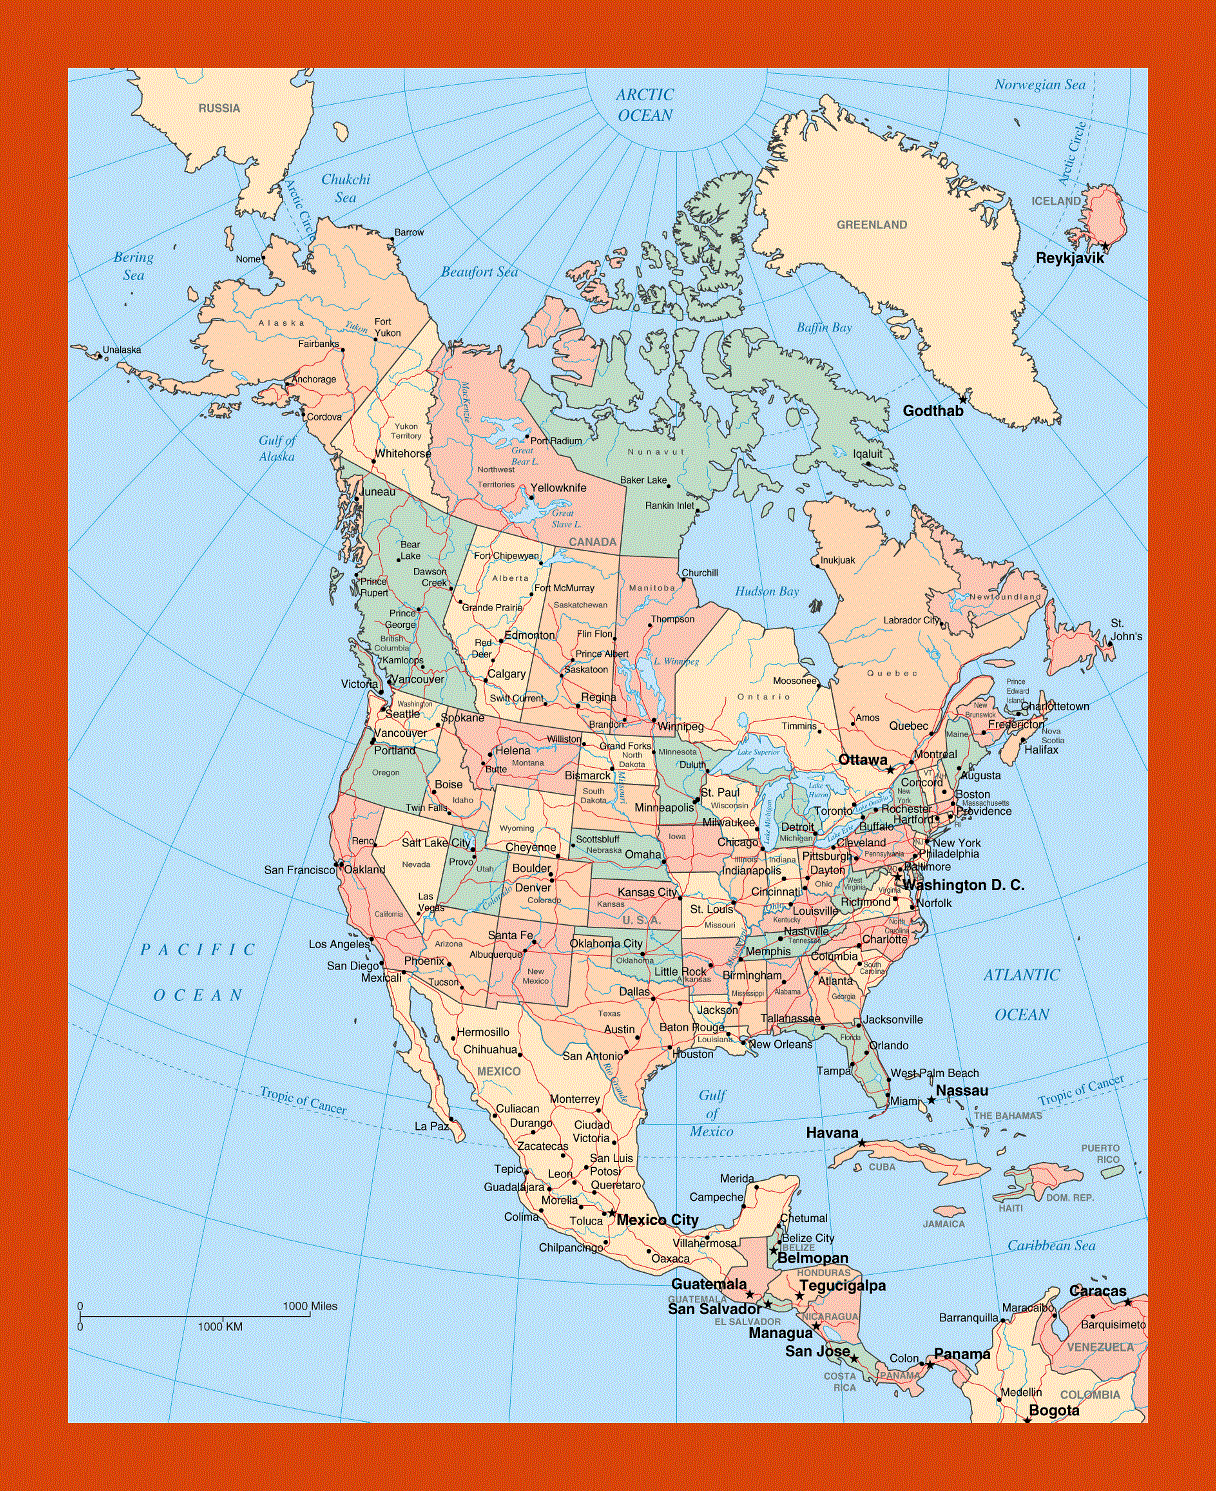 Political map of North America